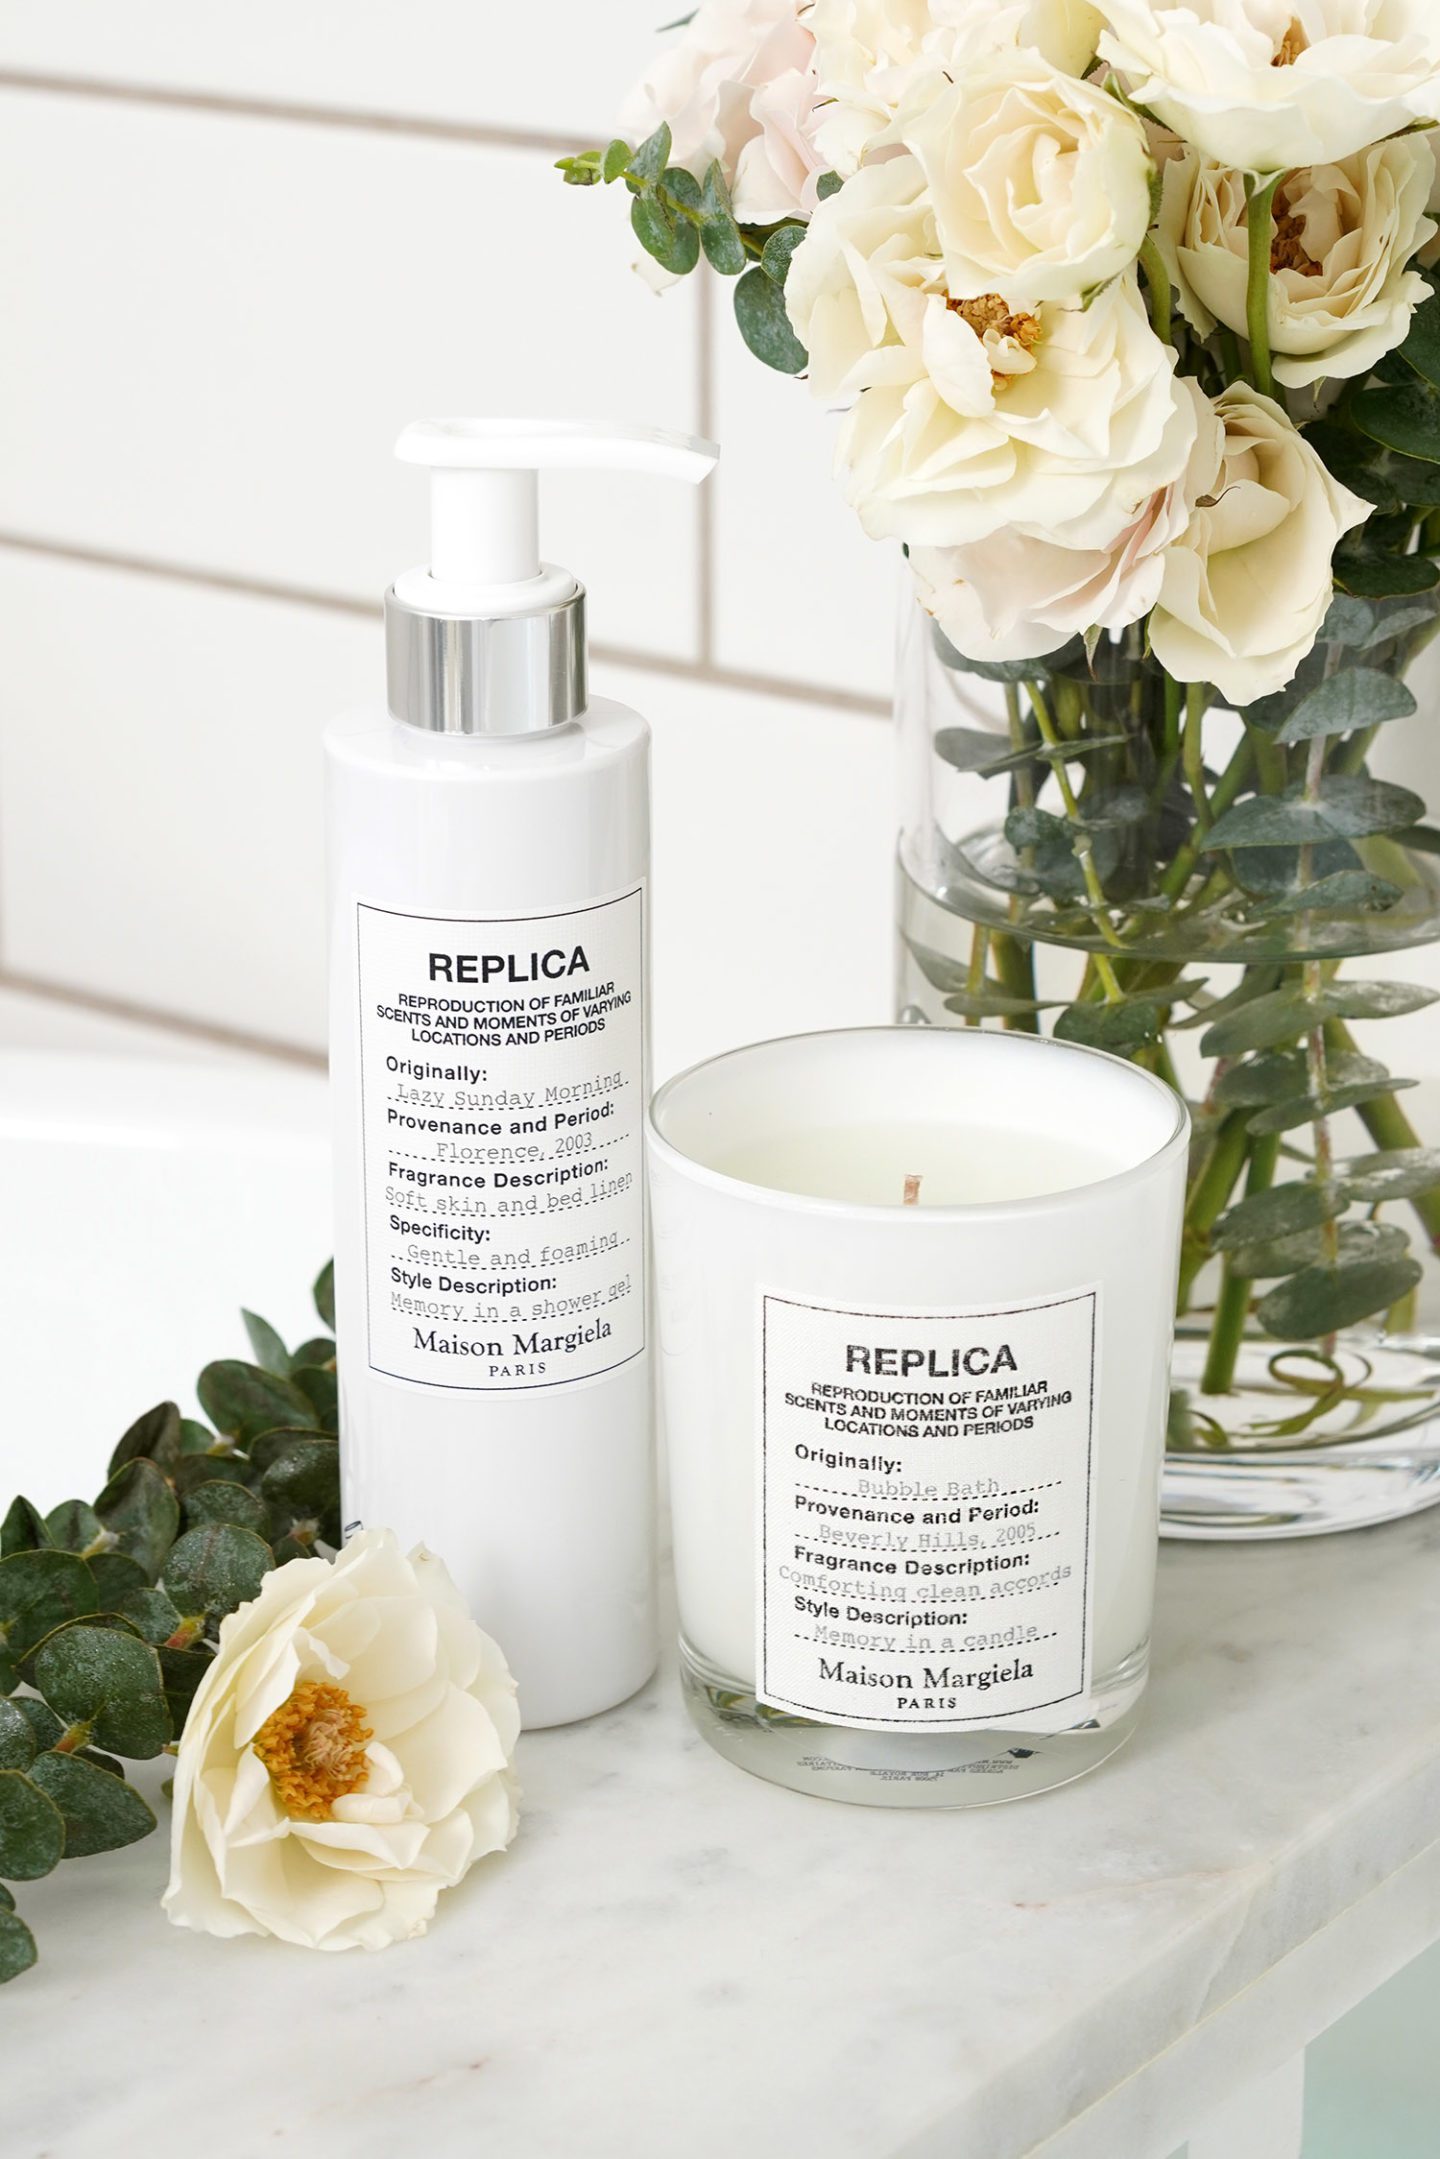 Replica Lazy Sunday Morning Shower Gel and Bubble Bath Candle